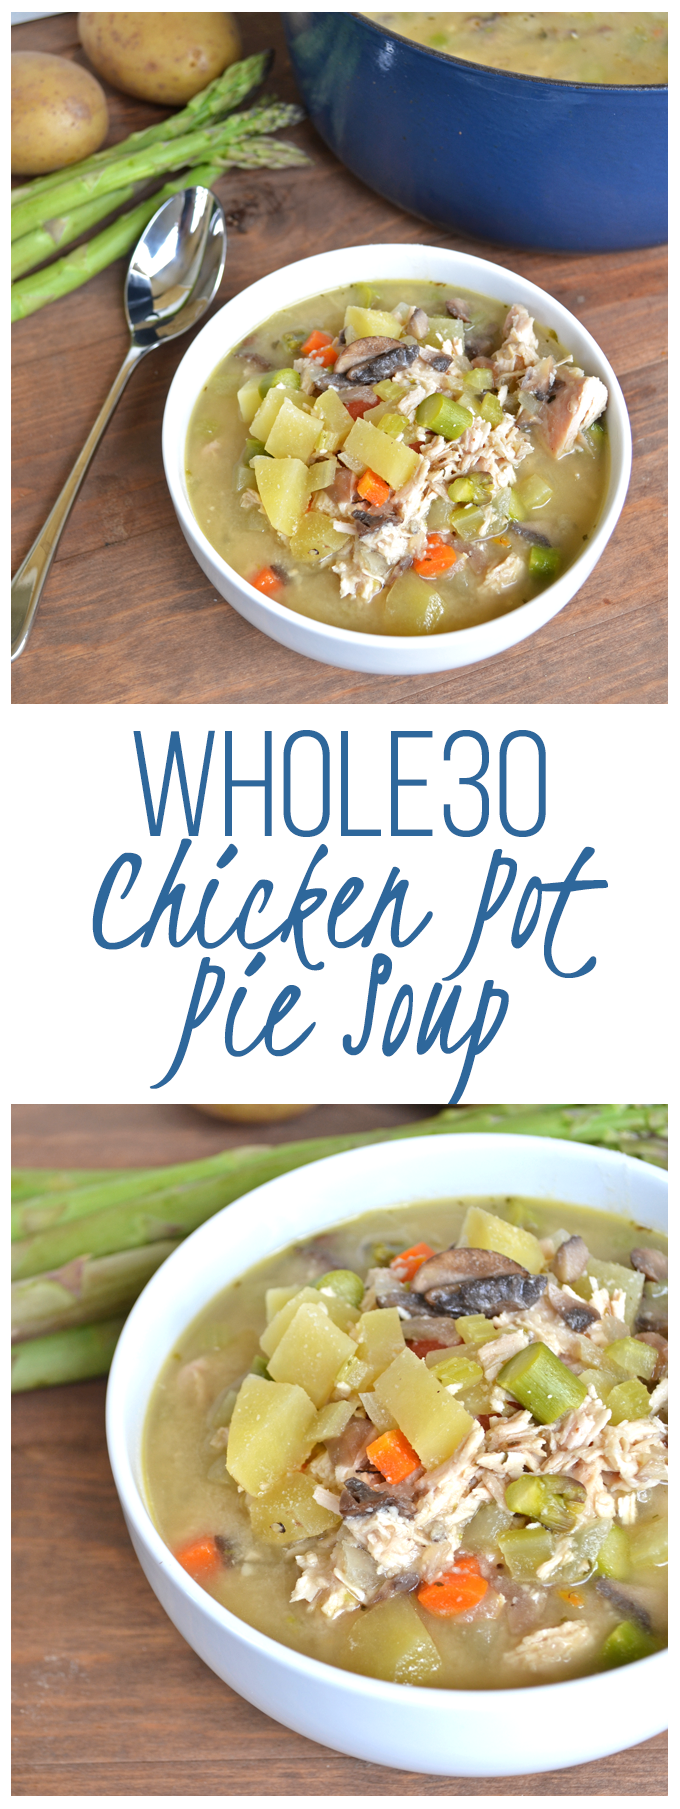 Chicken Pot Pie Soup! Whole30 approved and paleo! Asparagus instead of peas and you'll never guess what makes it so creamy but still non-dairy!